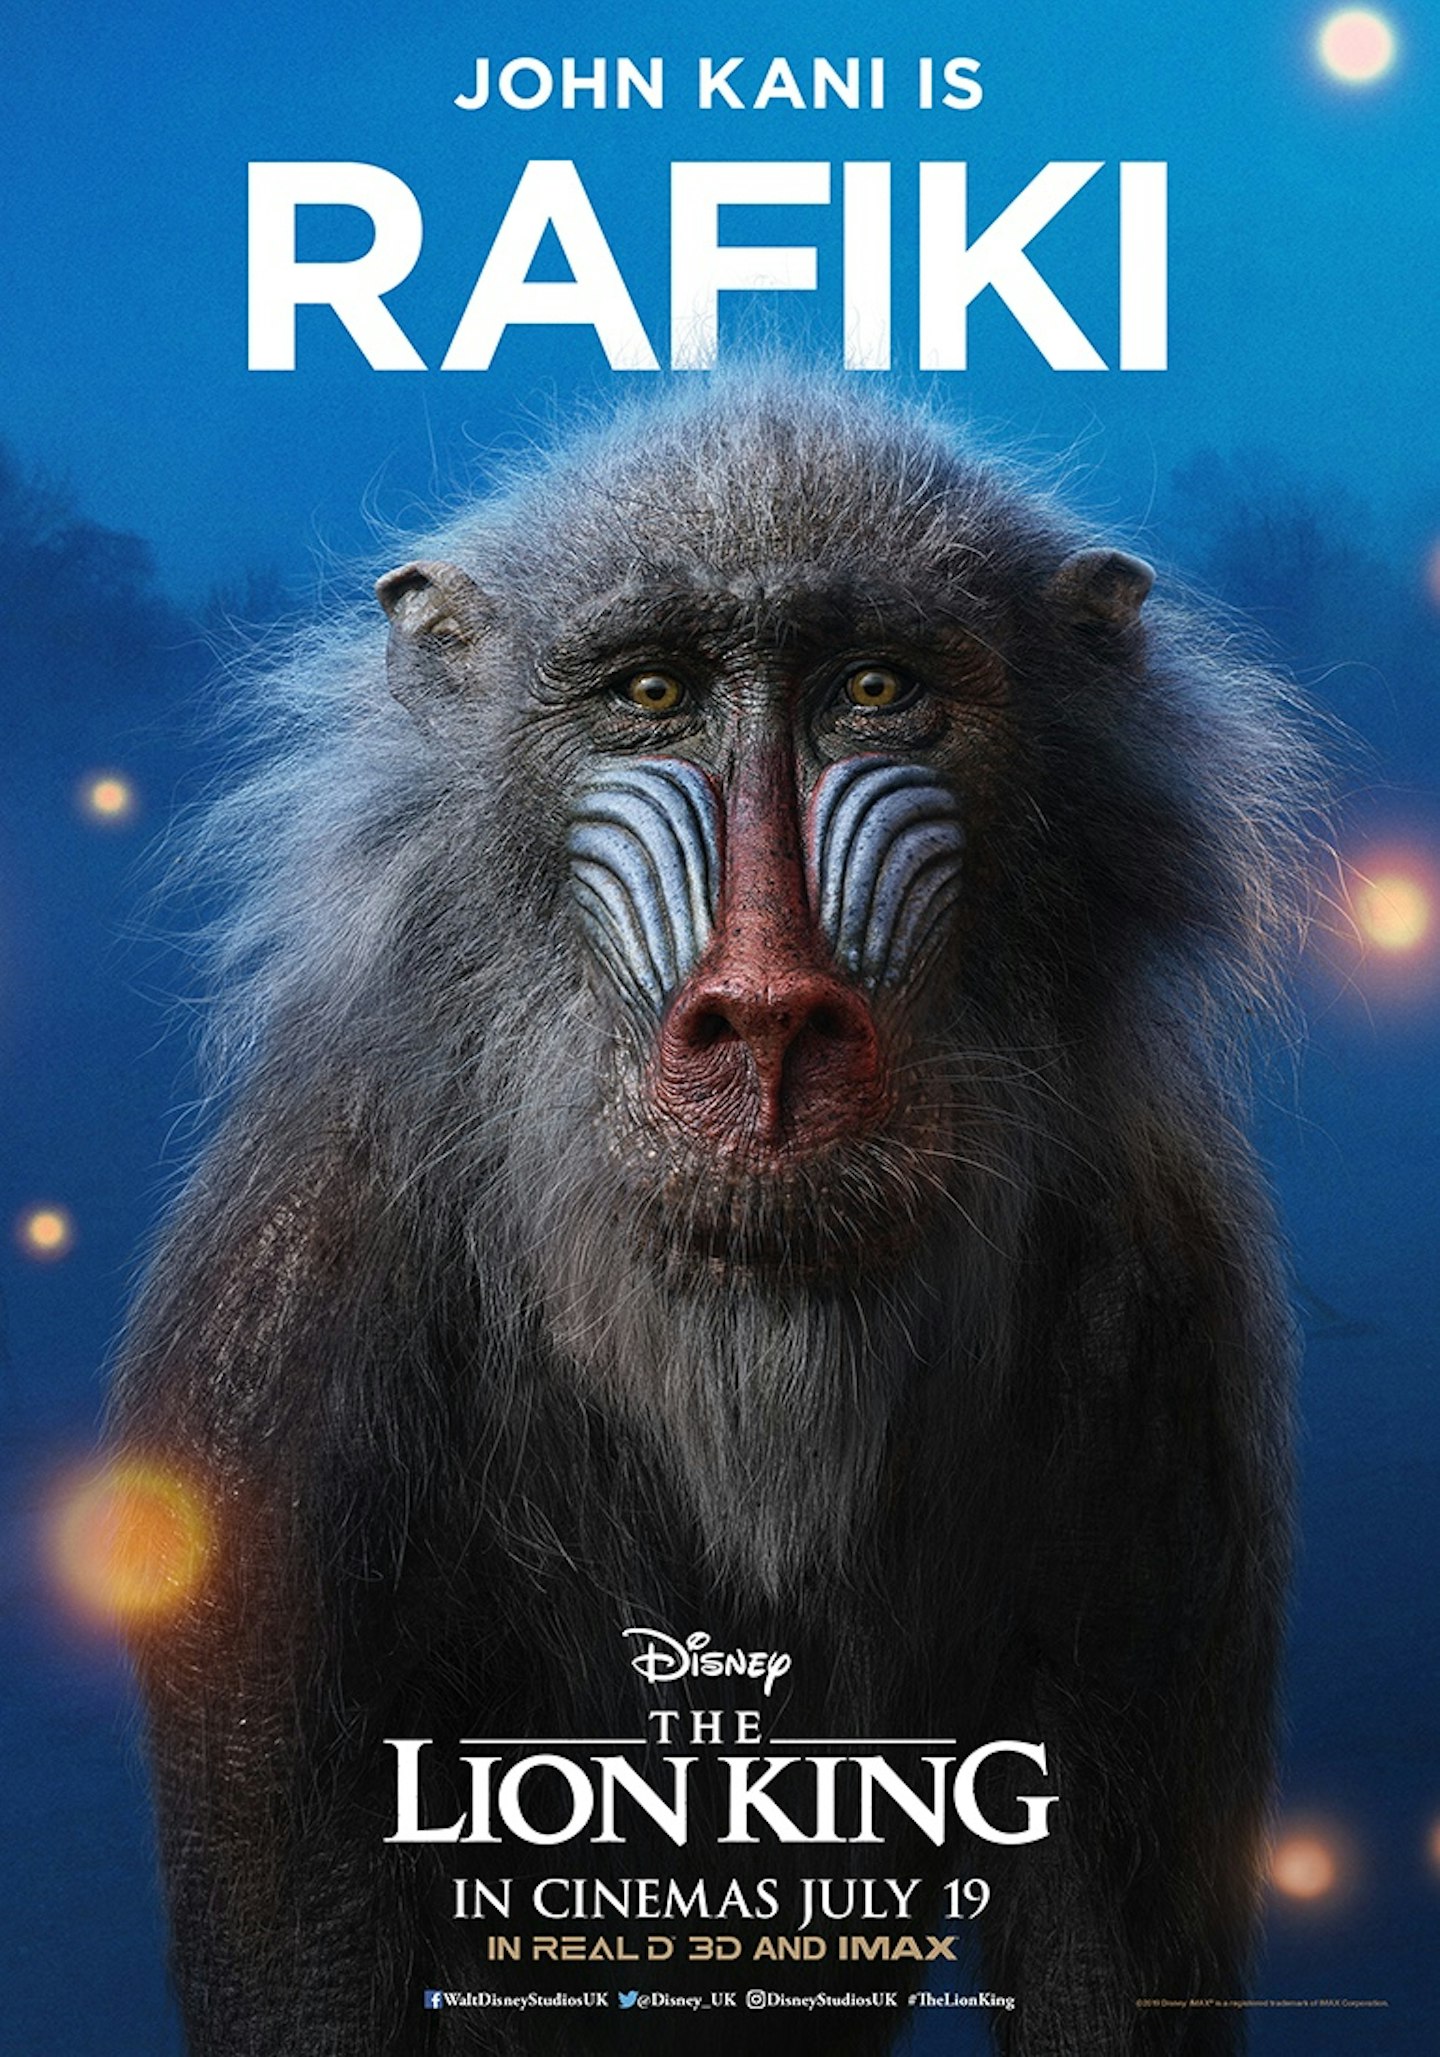 Lion King character posters